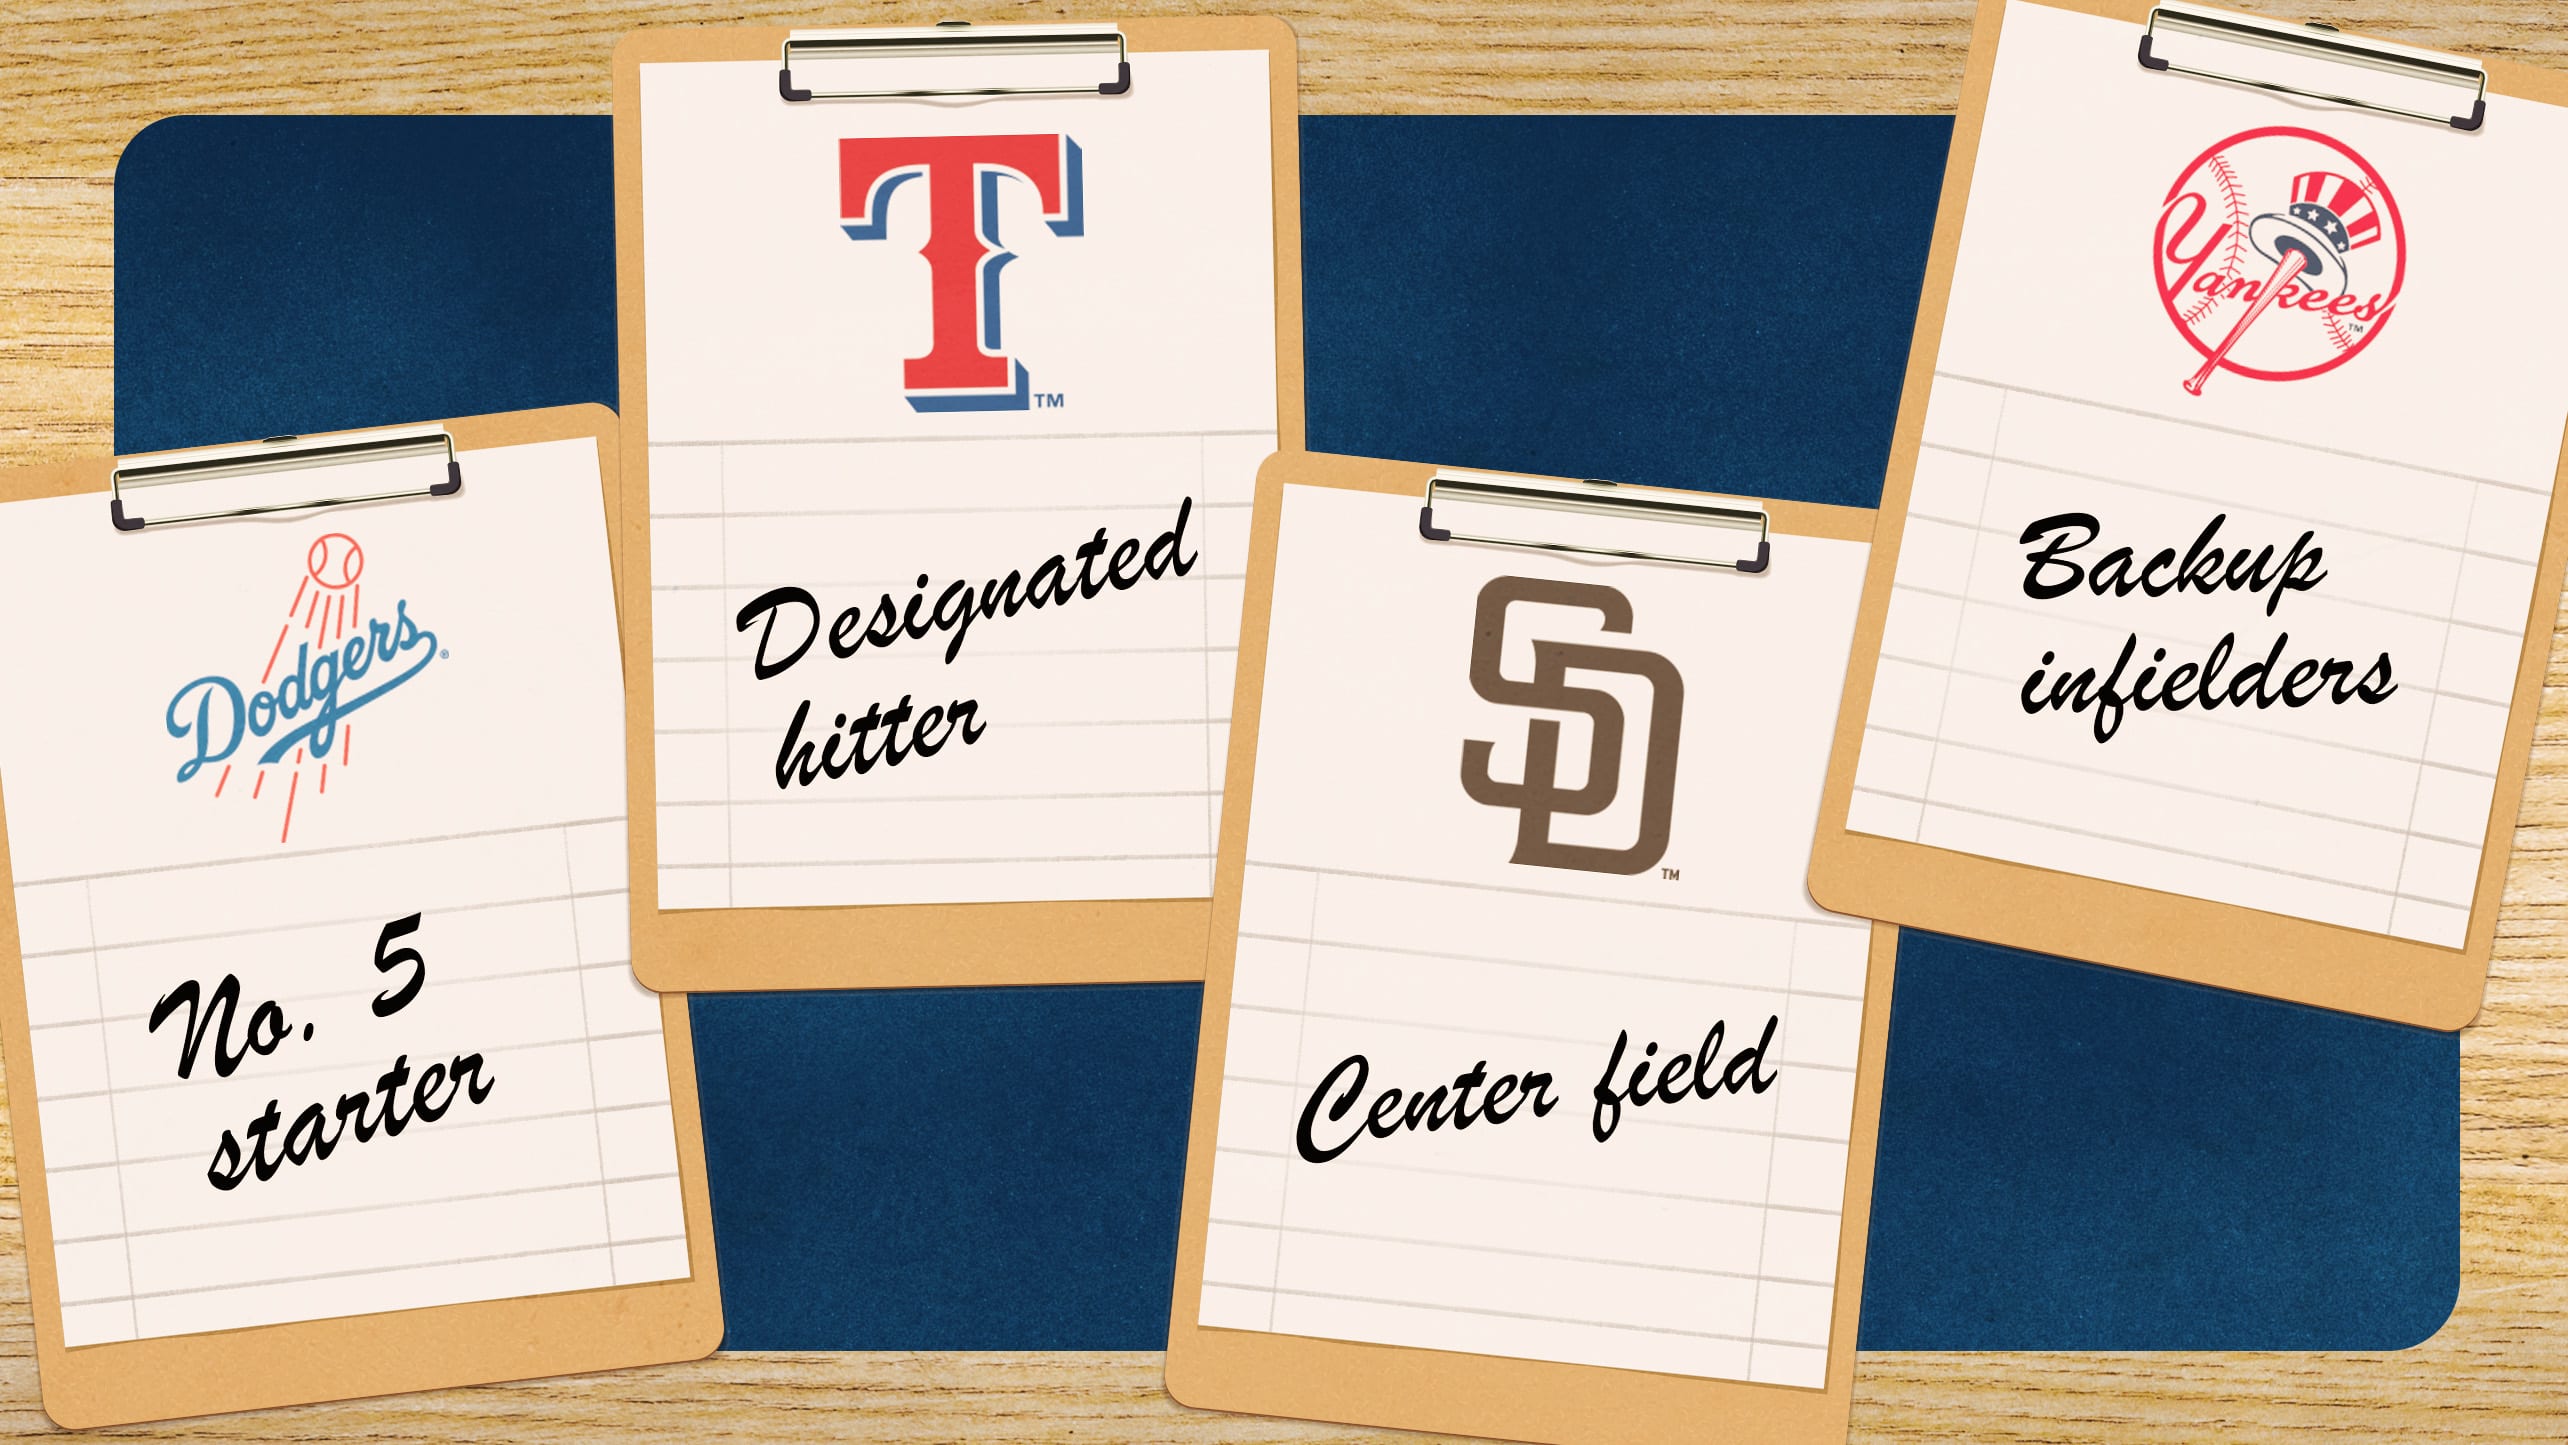 Designed image with clipboards featuring team logos and positions